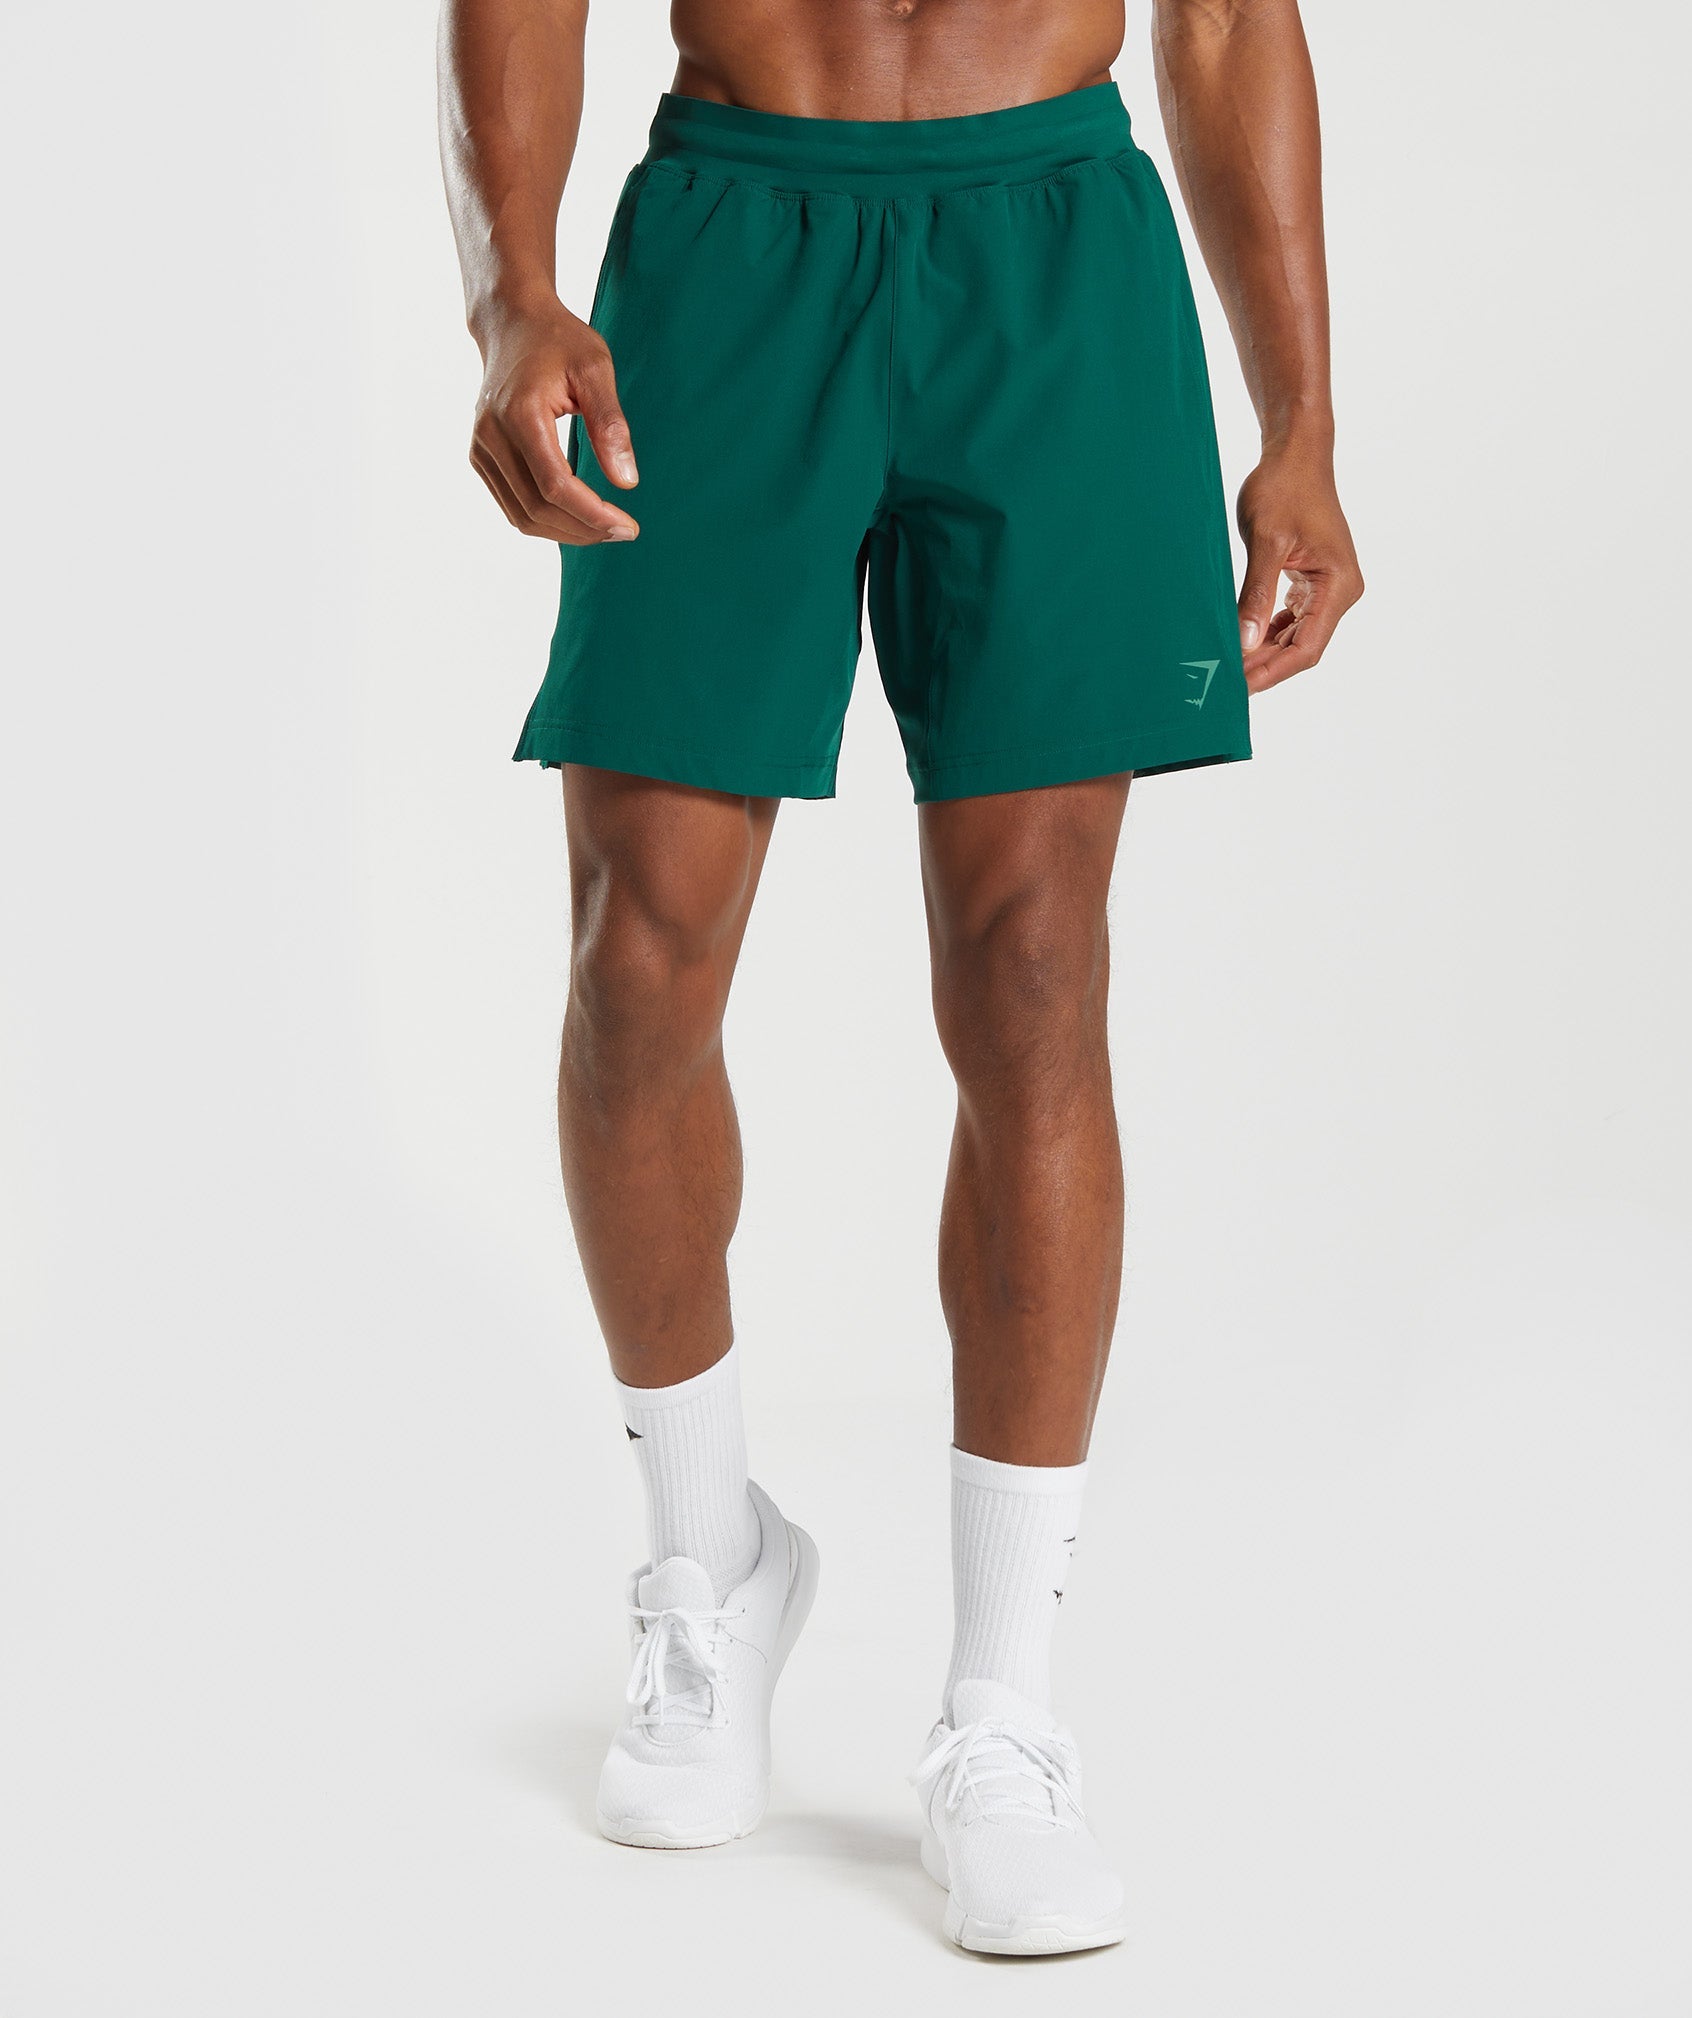 Apex 8" Function Shorts in Woodland Green